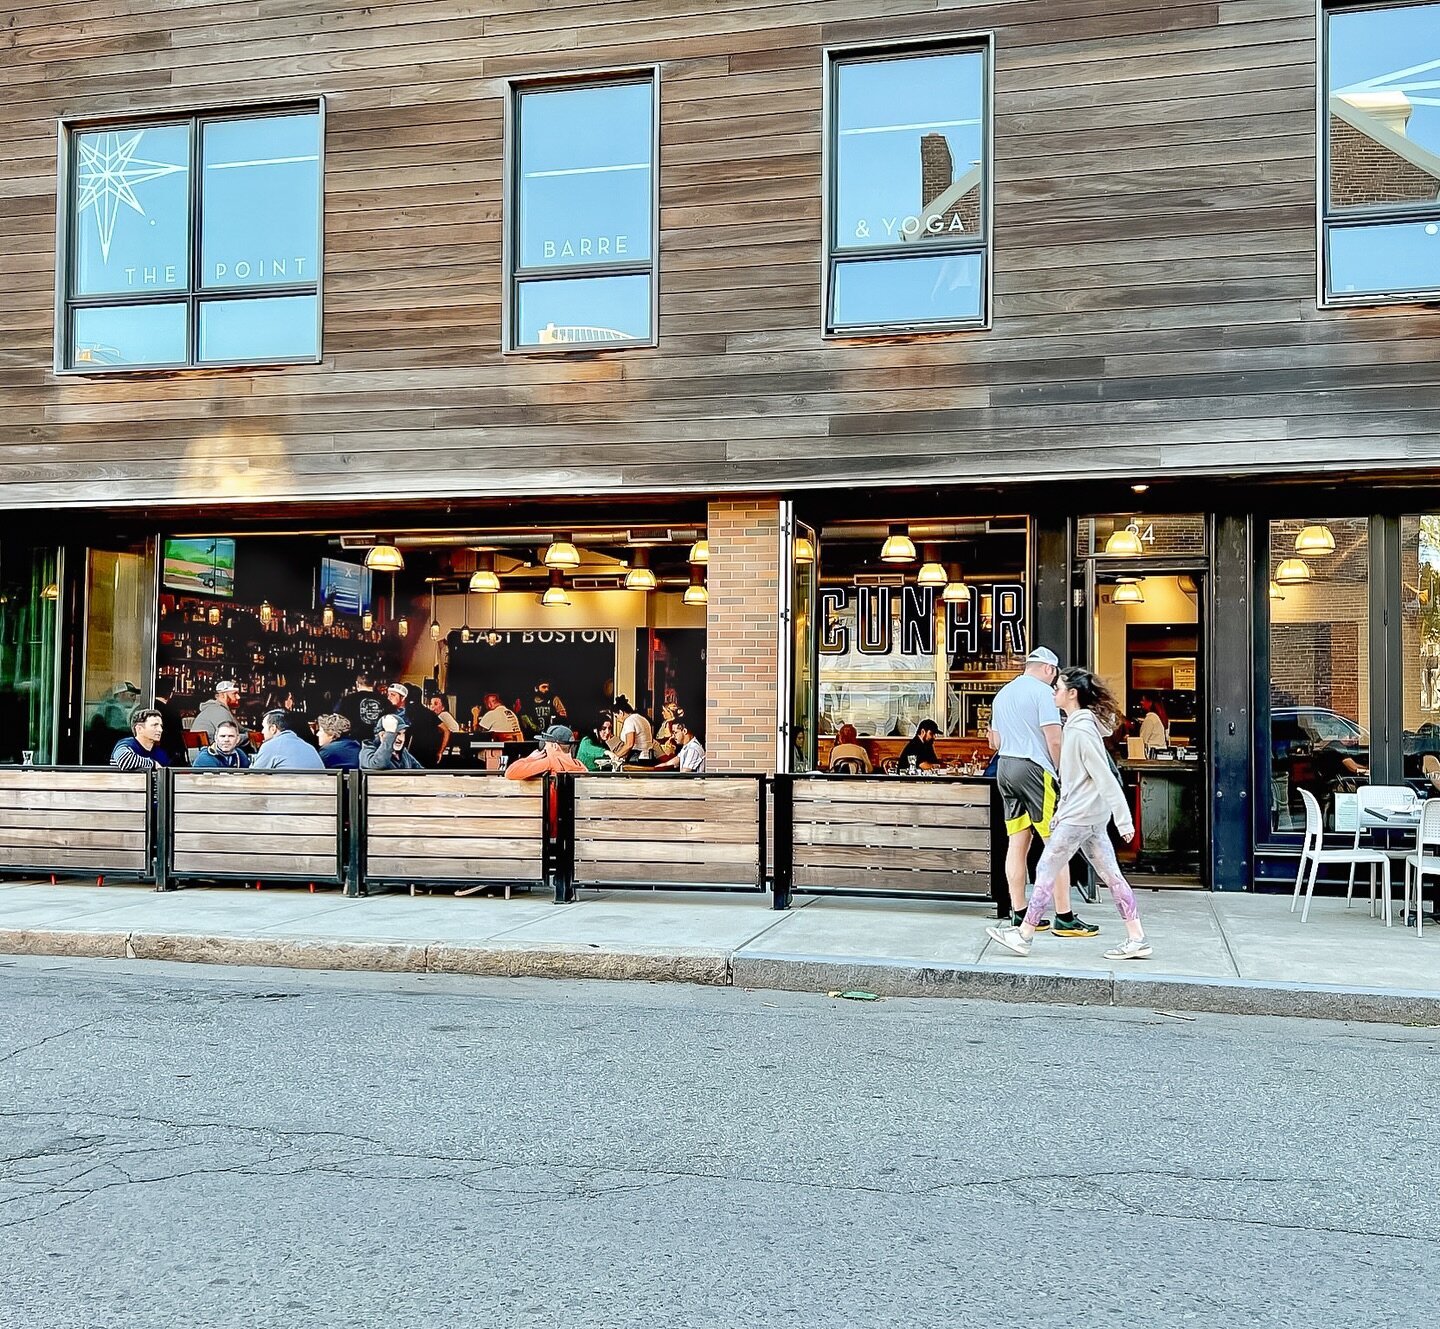 Patio season is almost here ☀️ Stay tuned for an opening date!

#patioseason #outdoordining #eastboston #spring #localrestaurants